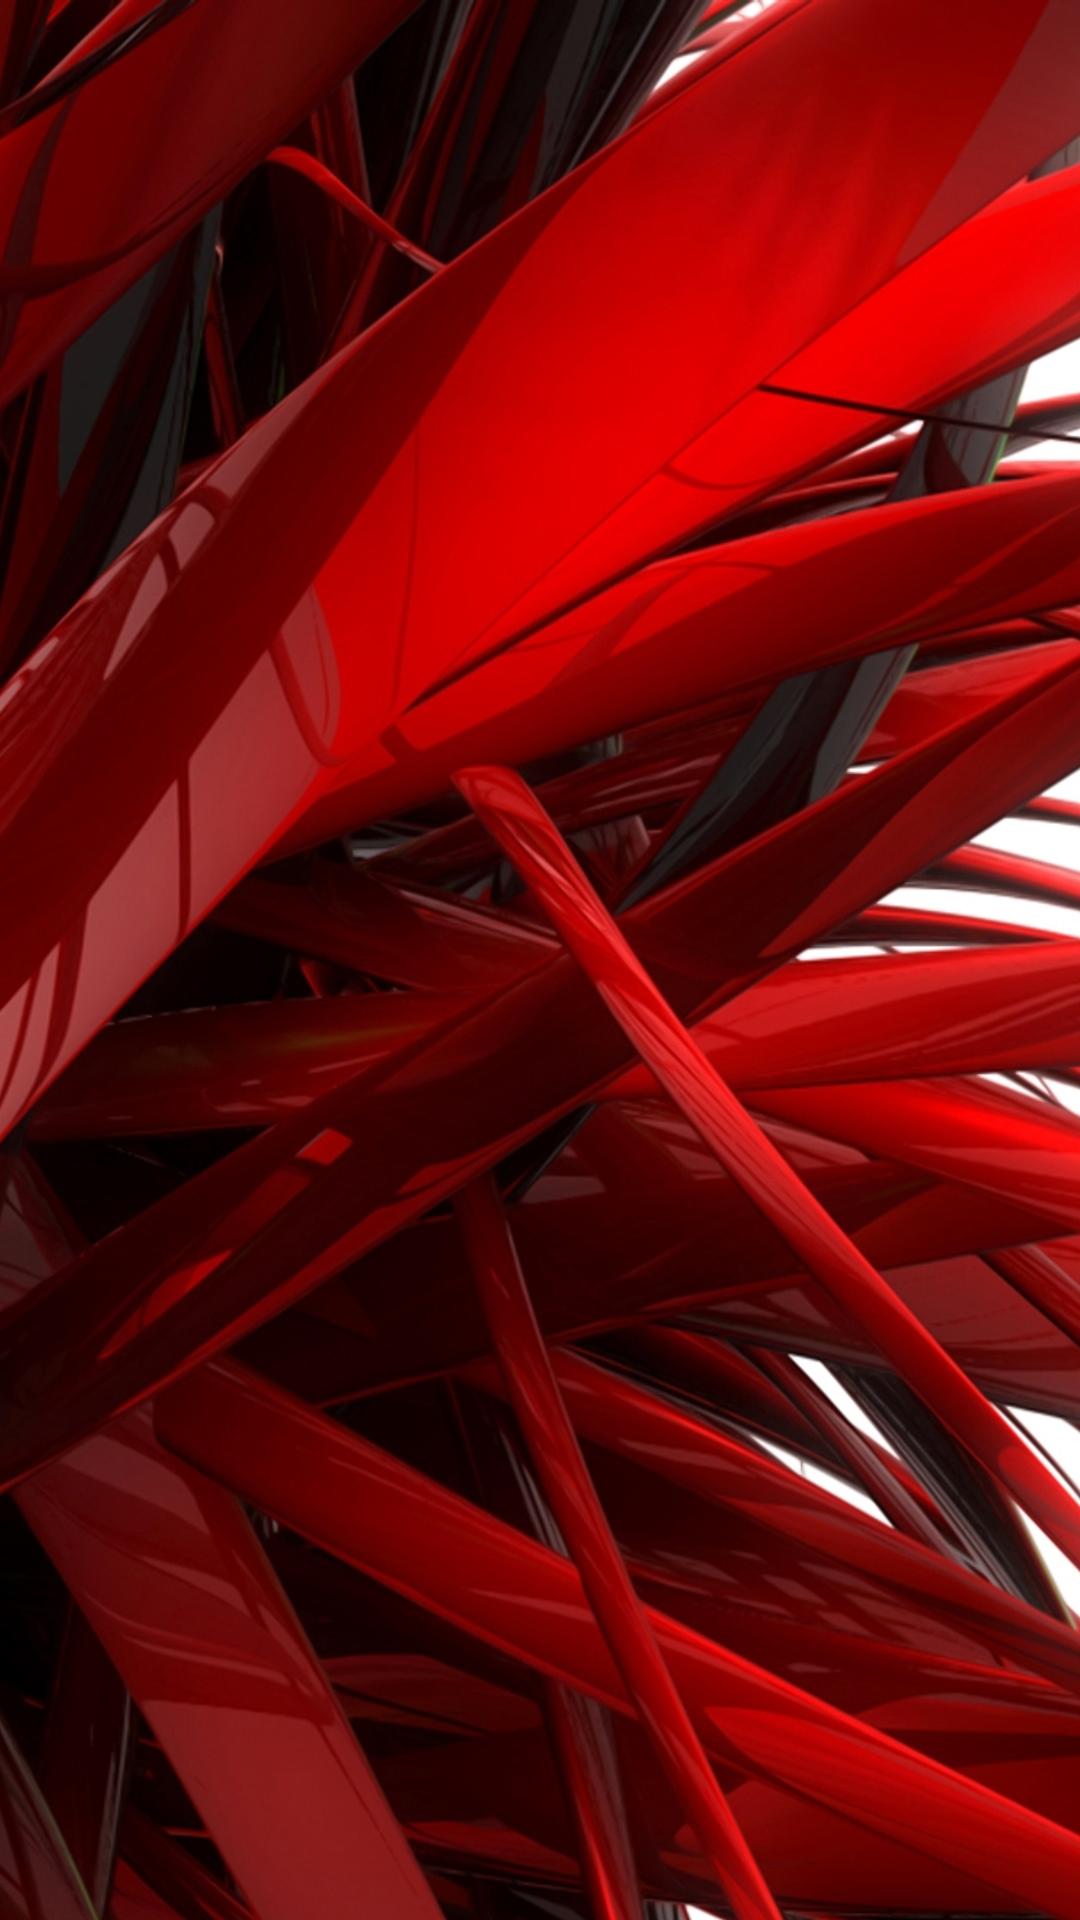 Red lines - Abstract HD wallpaper Wallpaper Download 1080x1920